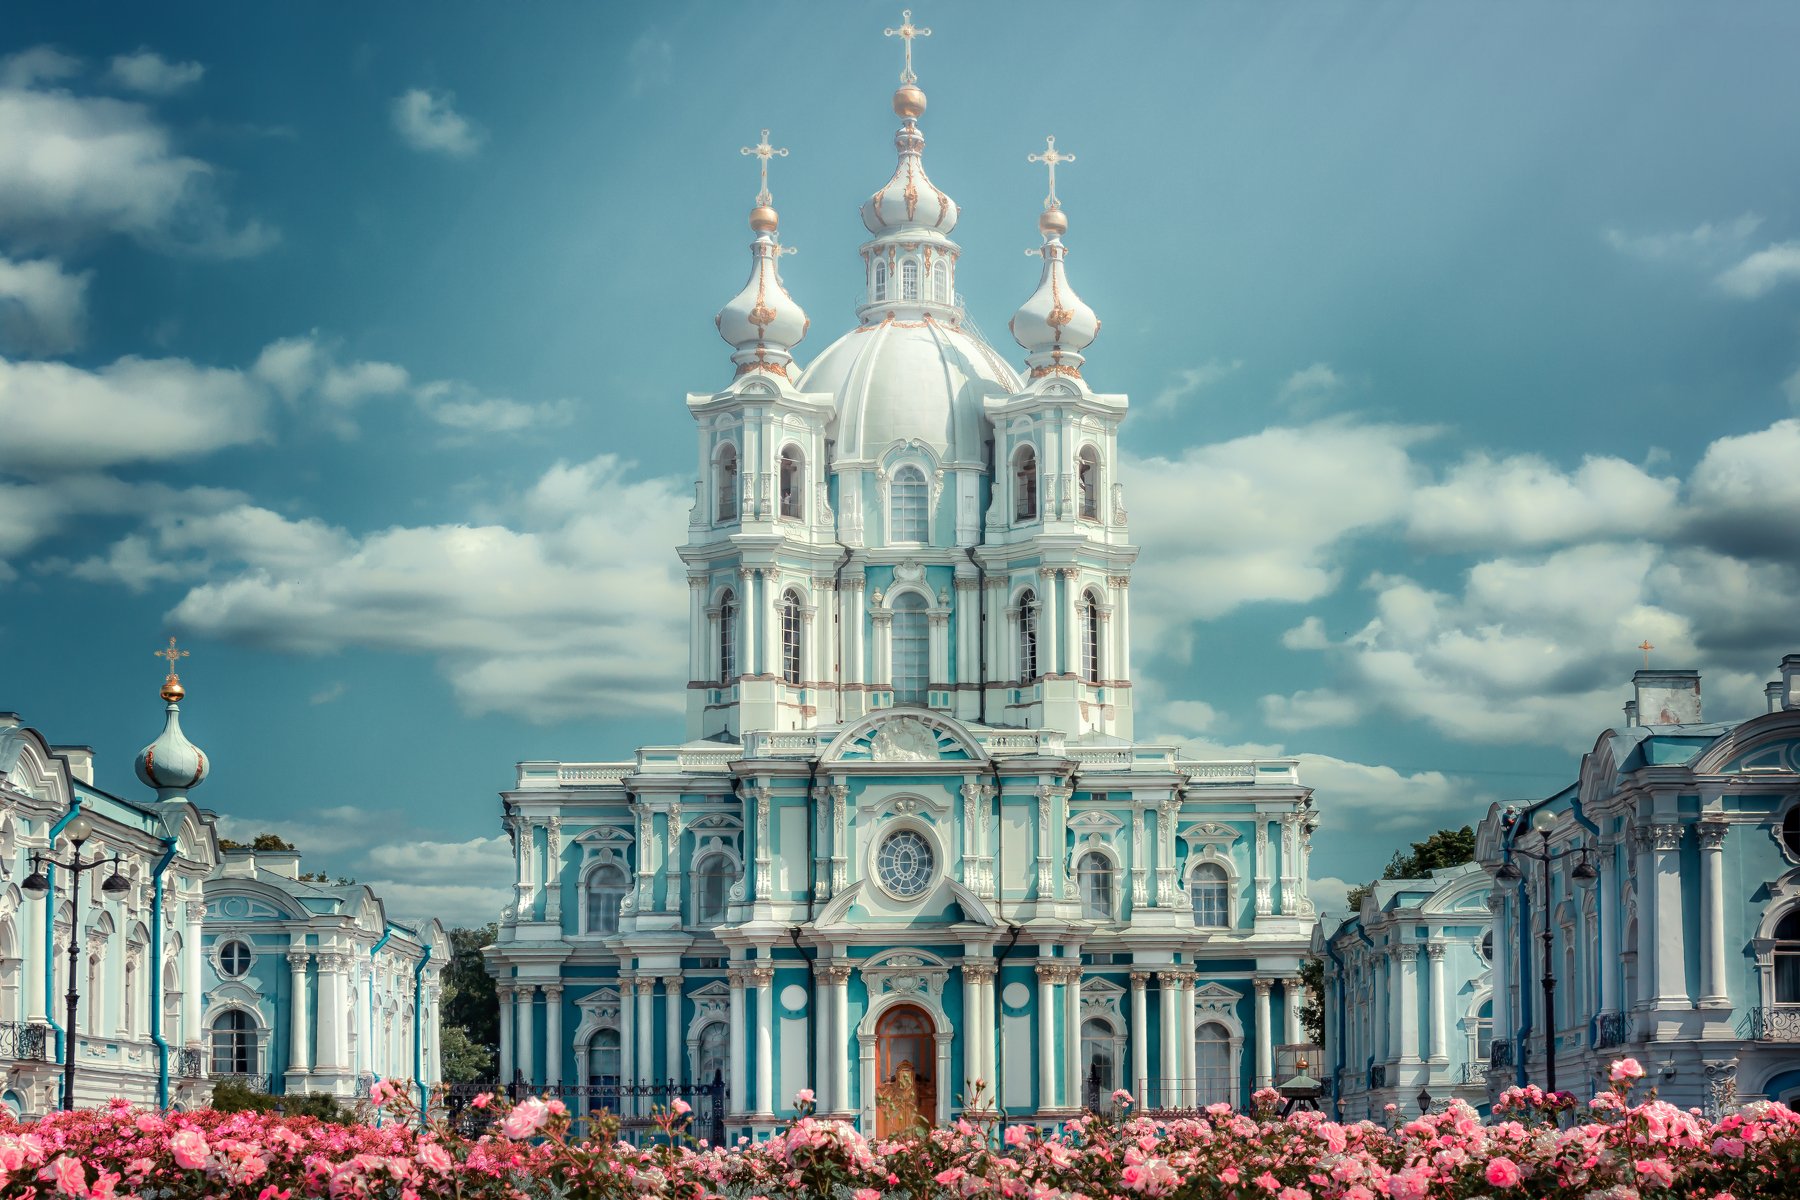 General 1800x1200 Andrew Vasiliev sky clouds flowers cross sun rays sunlight architecture cathedral St. Petersburg Russia